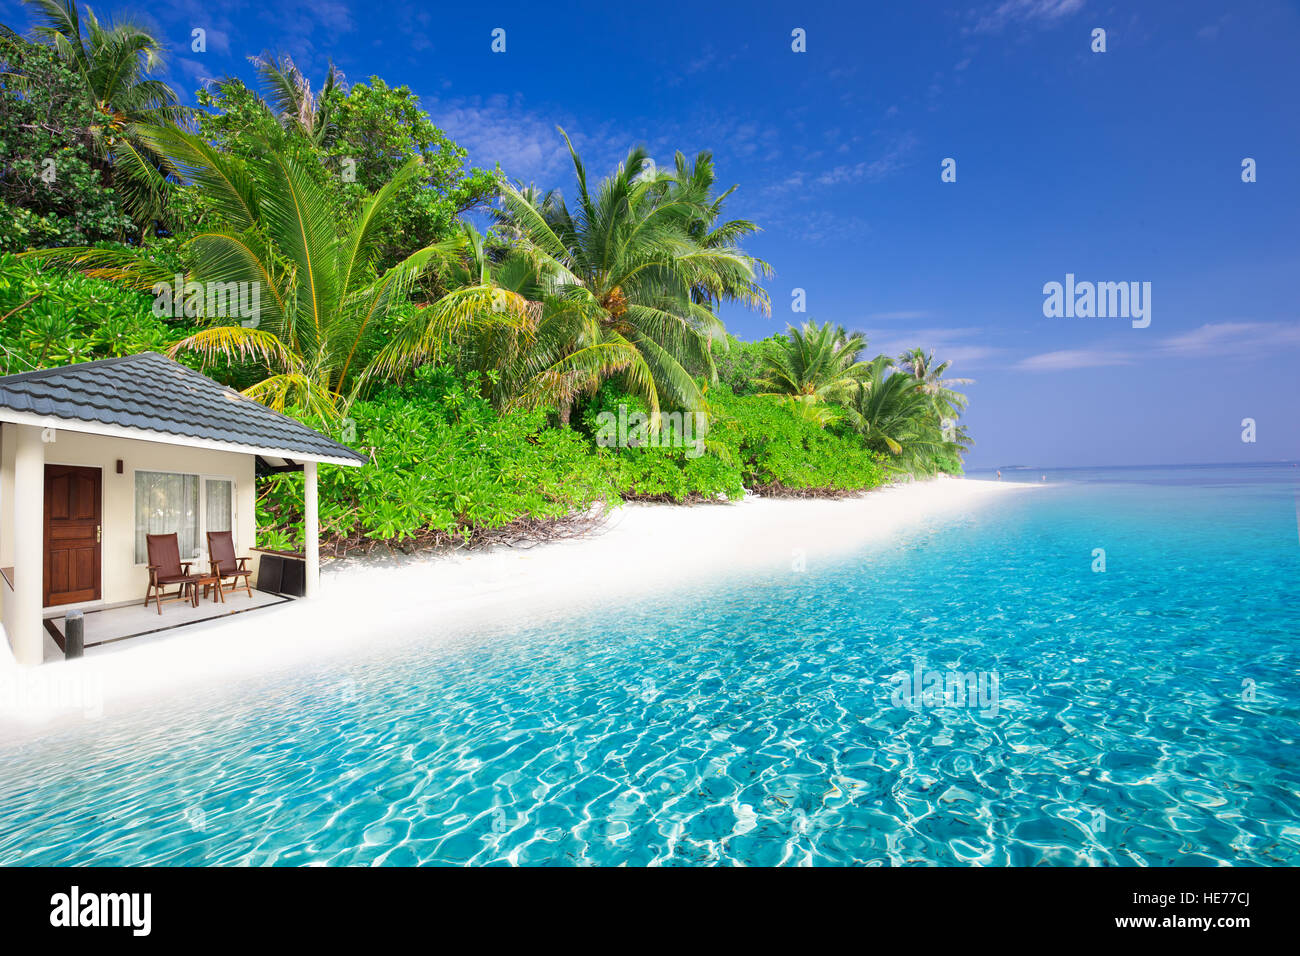 Overwater bungalows on tropical island with sandy beach, palm trees and turquoise clear water Stock Photo